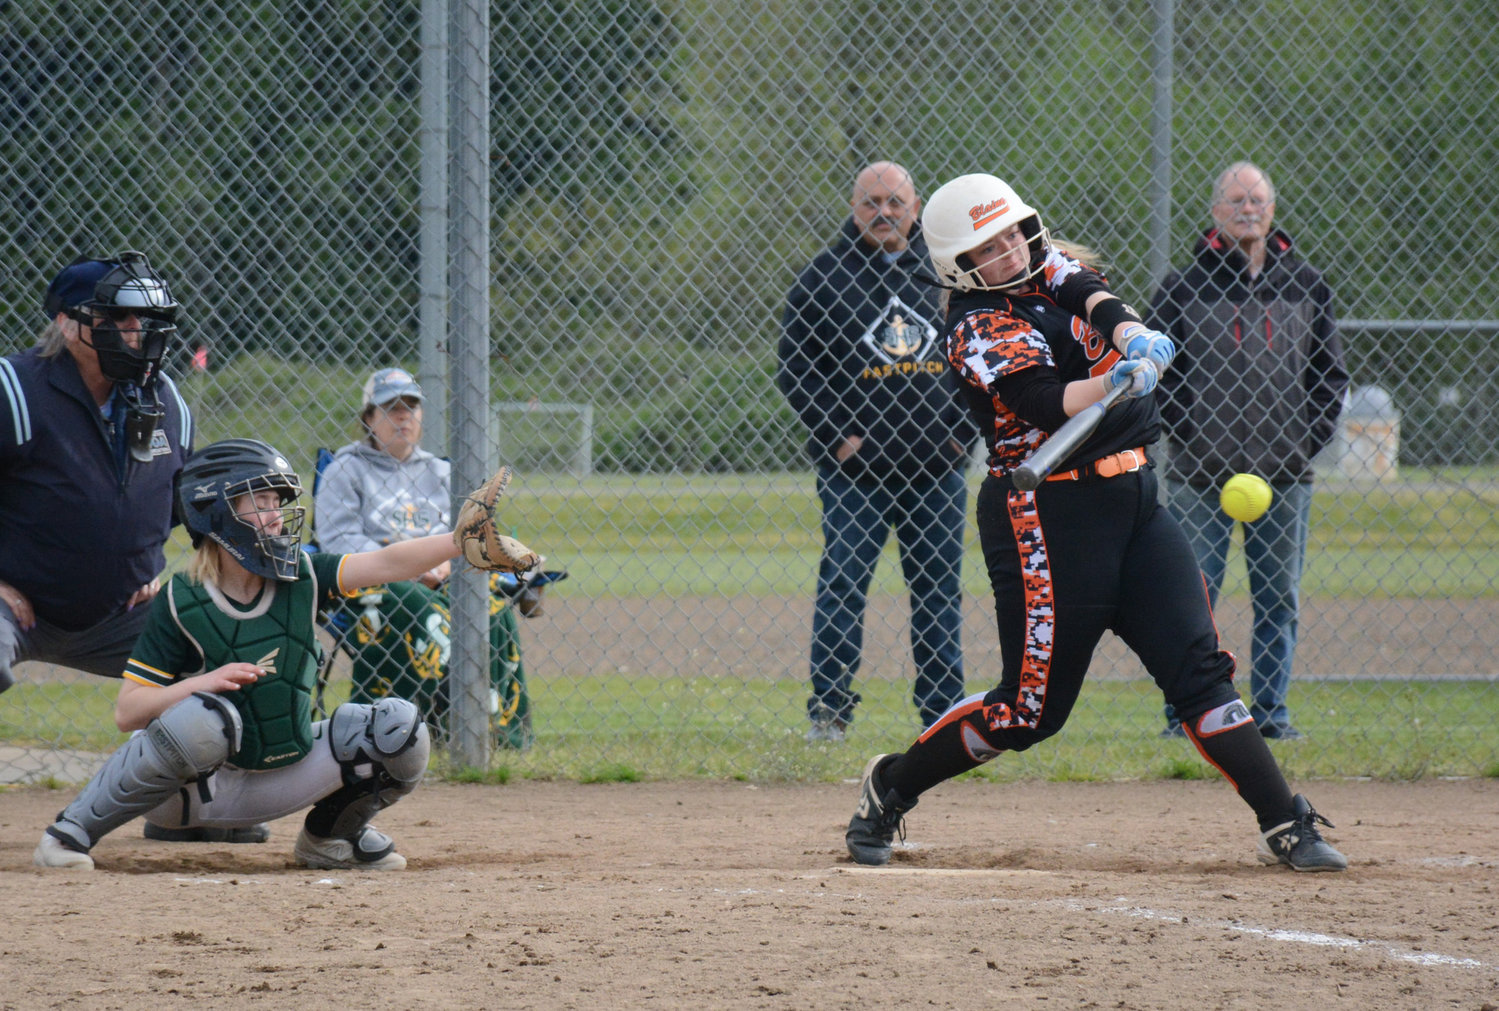 Makenna Wright at bat in the Lady Borderites' 13-1 win over Sehome May 11 at Pipeline Fields.